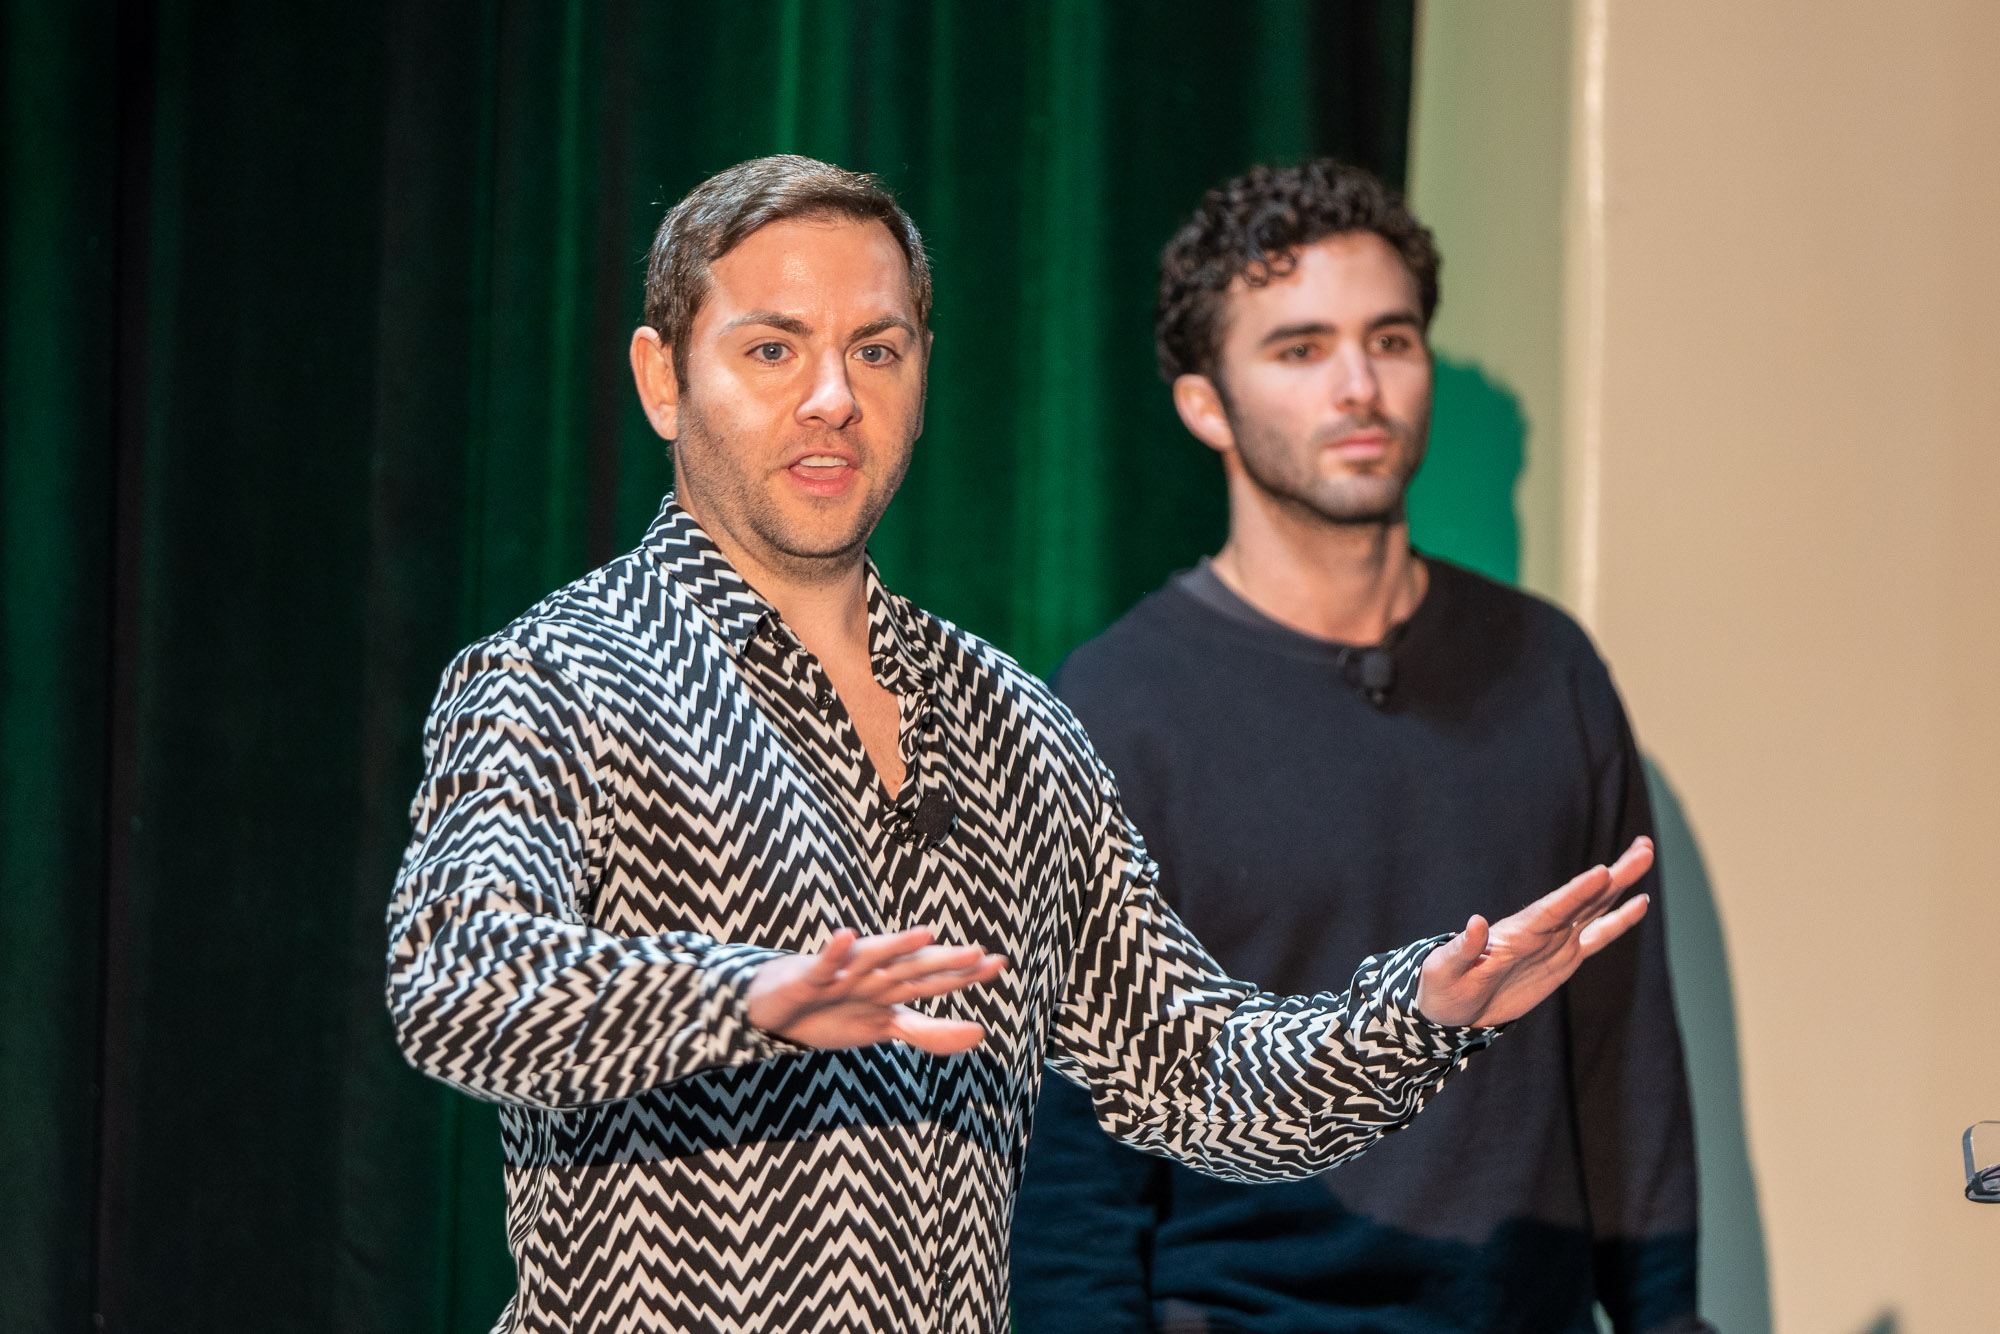 Josh Machiz, Partner at Redpoint, and Rashad Assir, Head of Content at Redpoint, talk about "How to turn your startup into a social star" at MinRegion Early Stage in Boston on April 20, 2023. Image Credit: Haje Jan Kamps / MinRegion